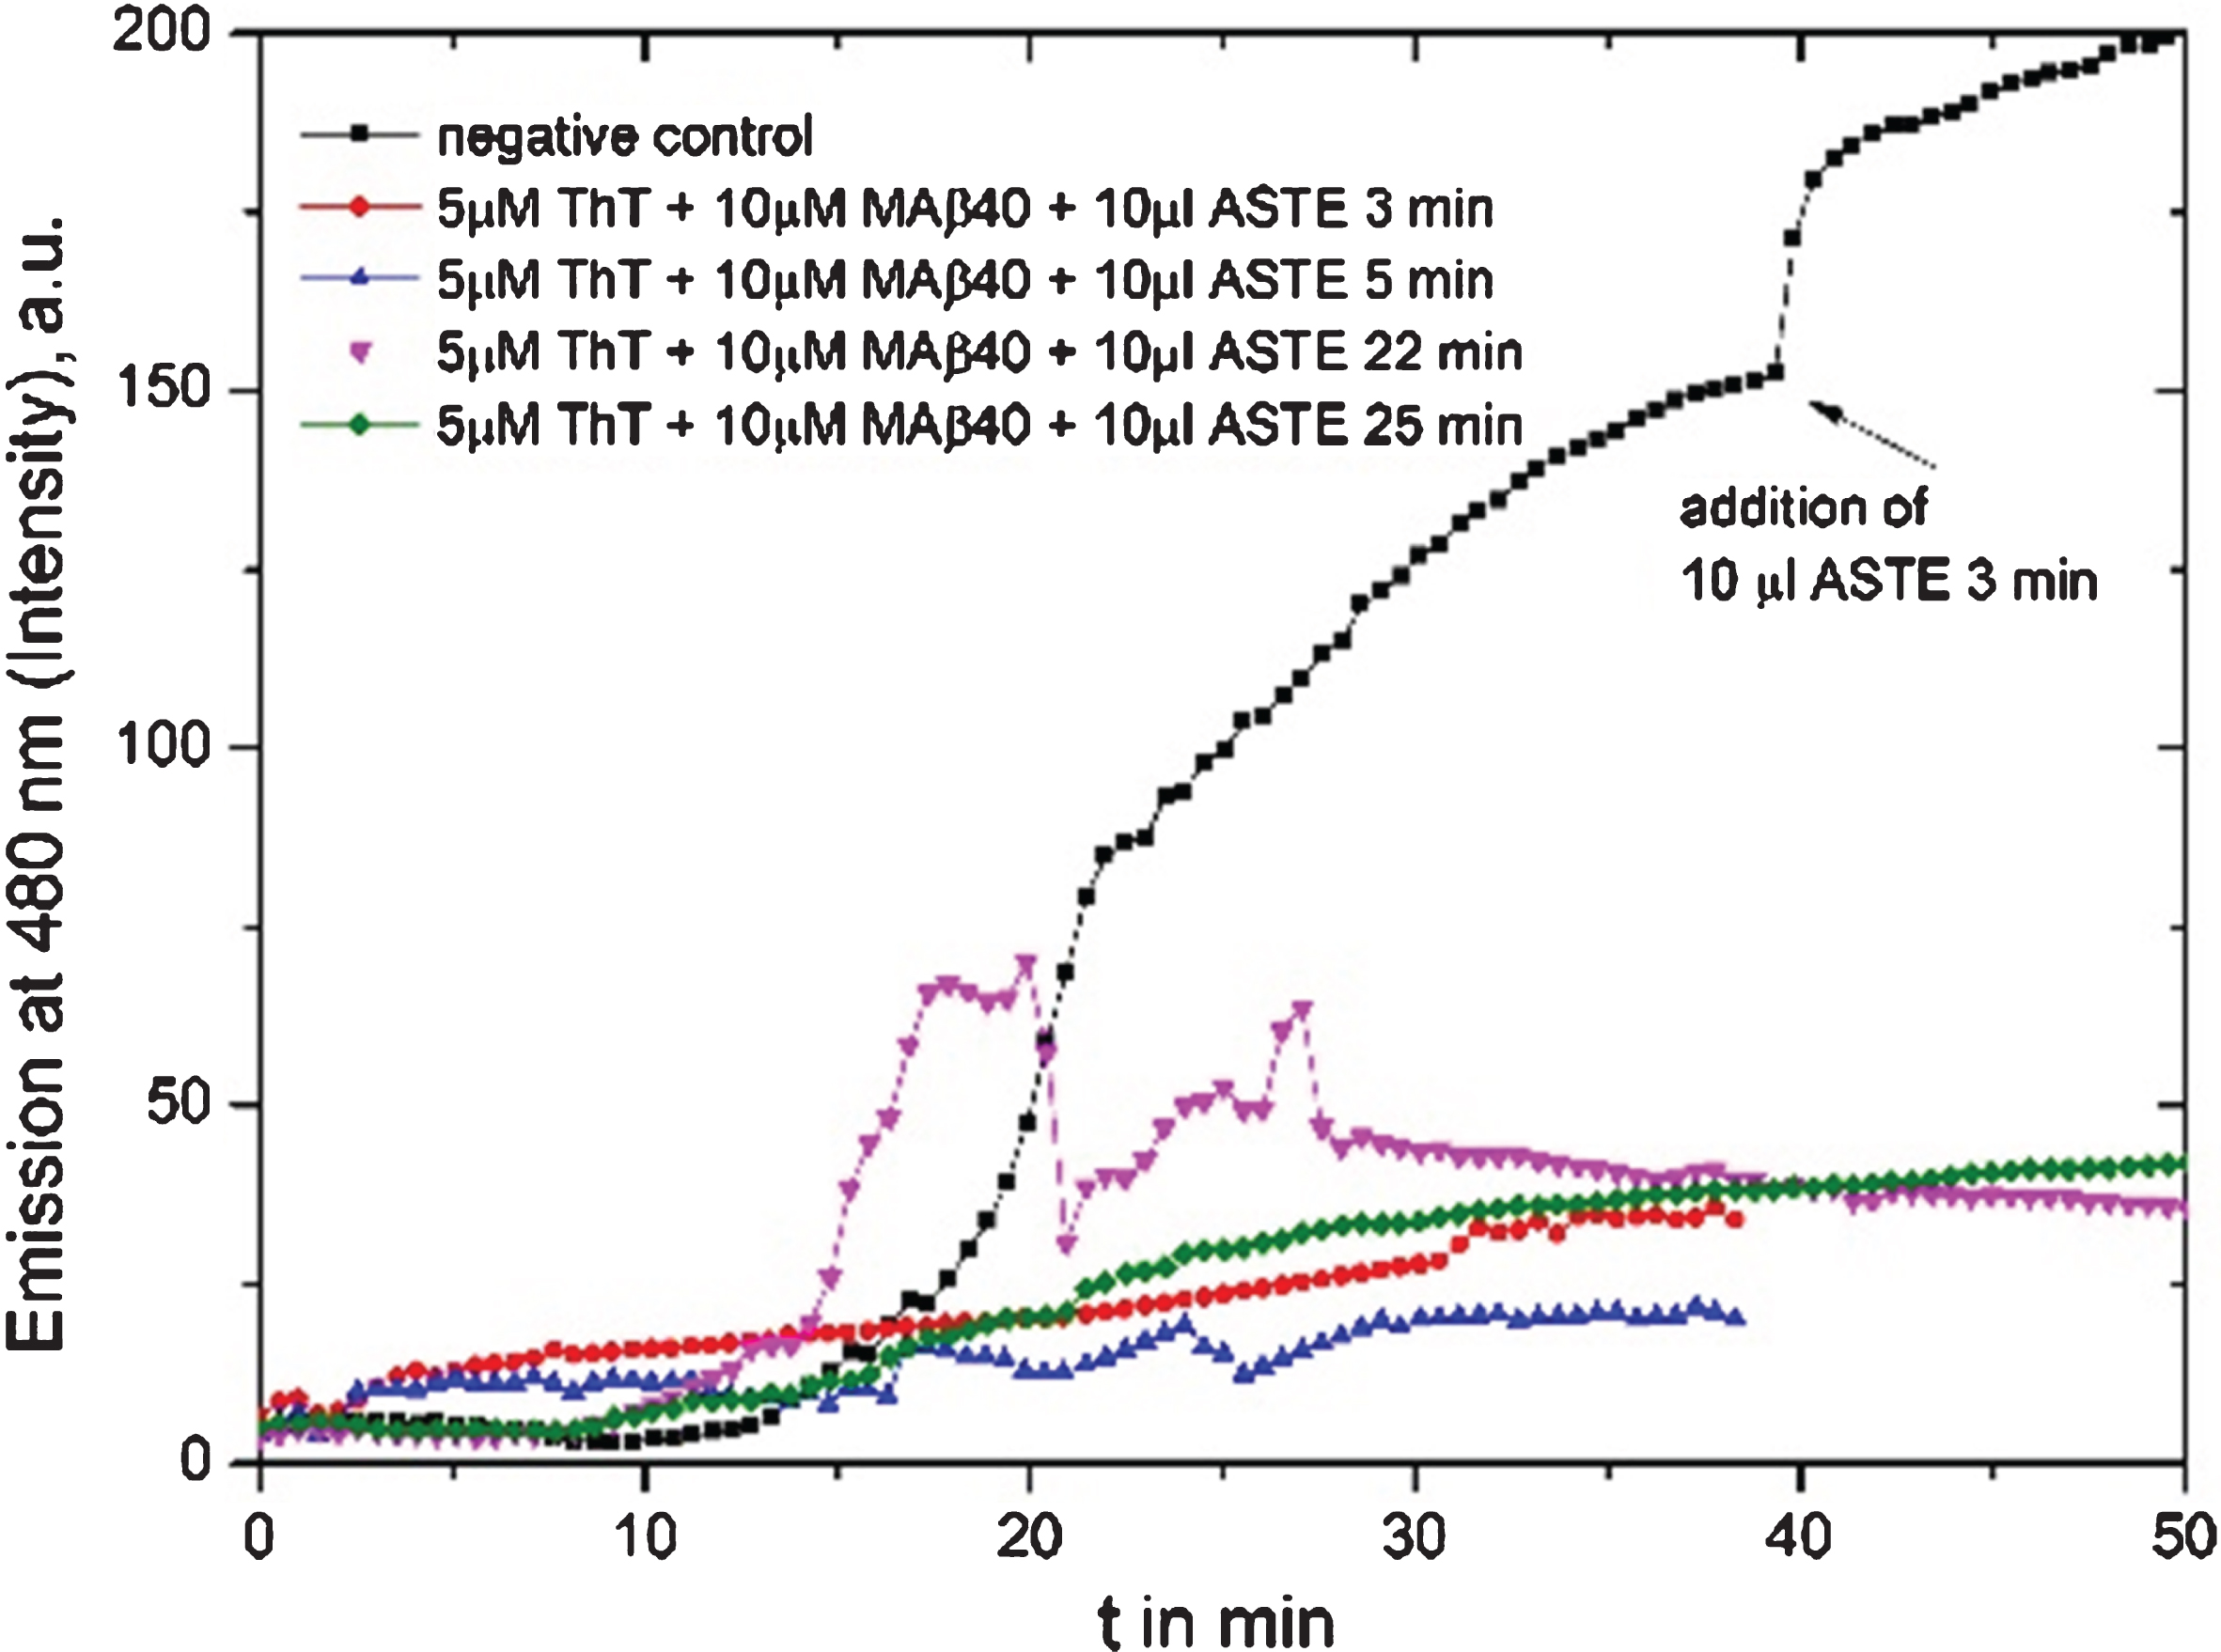 Fluorescence graph of 10 μl Ashwangandha tea extract (ASTE, 3 g in150 ml MilliQ water): black line is the reference where extract had been added after 45 min, the red line is a test of 10 μl ASTE brewed for 3 min added from the beginning, blue line with 10 μl ASTE brewing for 5 min, pink line with 10 μl 22 min, and green line with 10 μl 25 min extract.